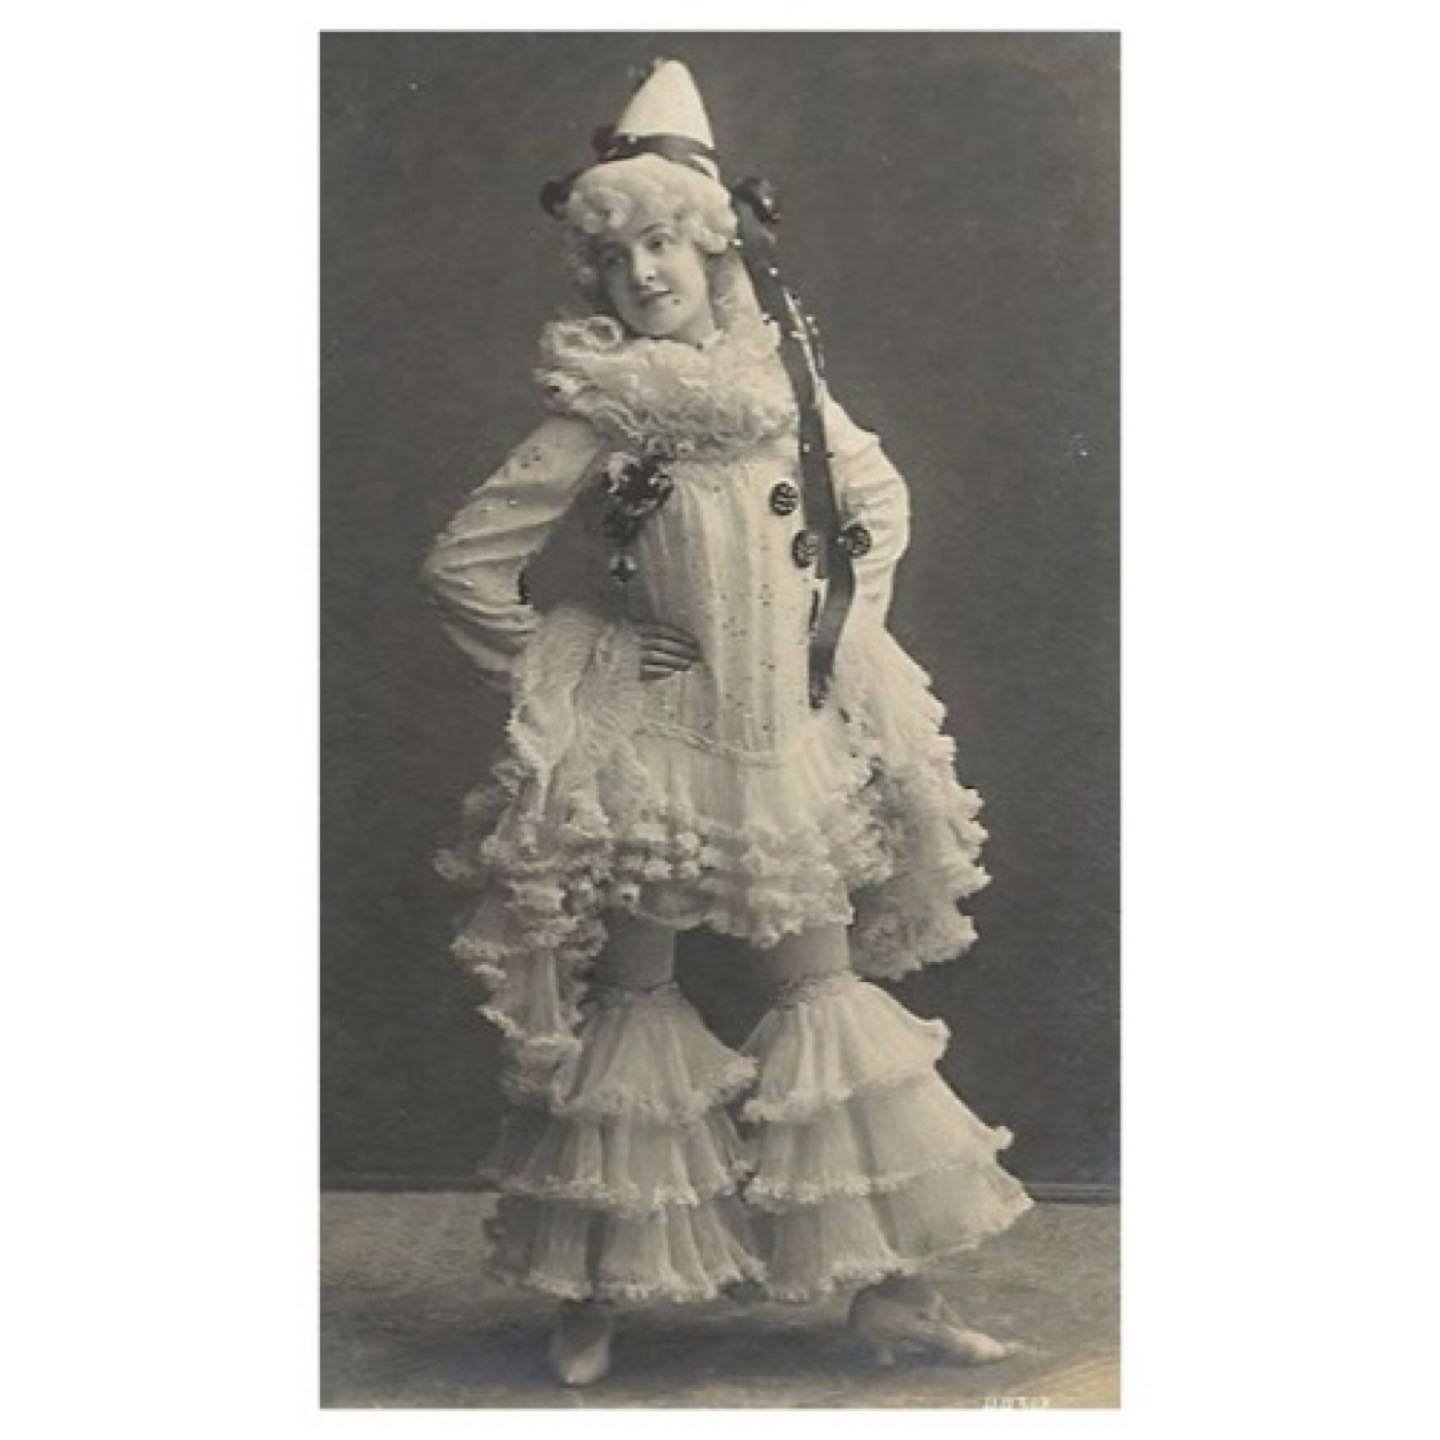 1920s ruffle clown costume

I couldn&rsquo;t find the performer&rsquo;s name or costumer info, but I love her ruffle bell bottoms, they look like they&rsquo;d just bounce as u walk. ☁️